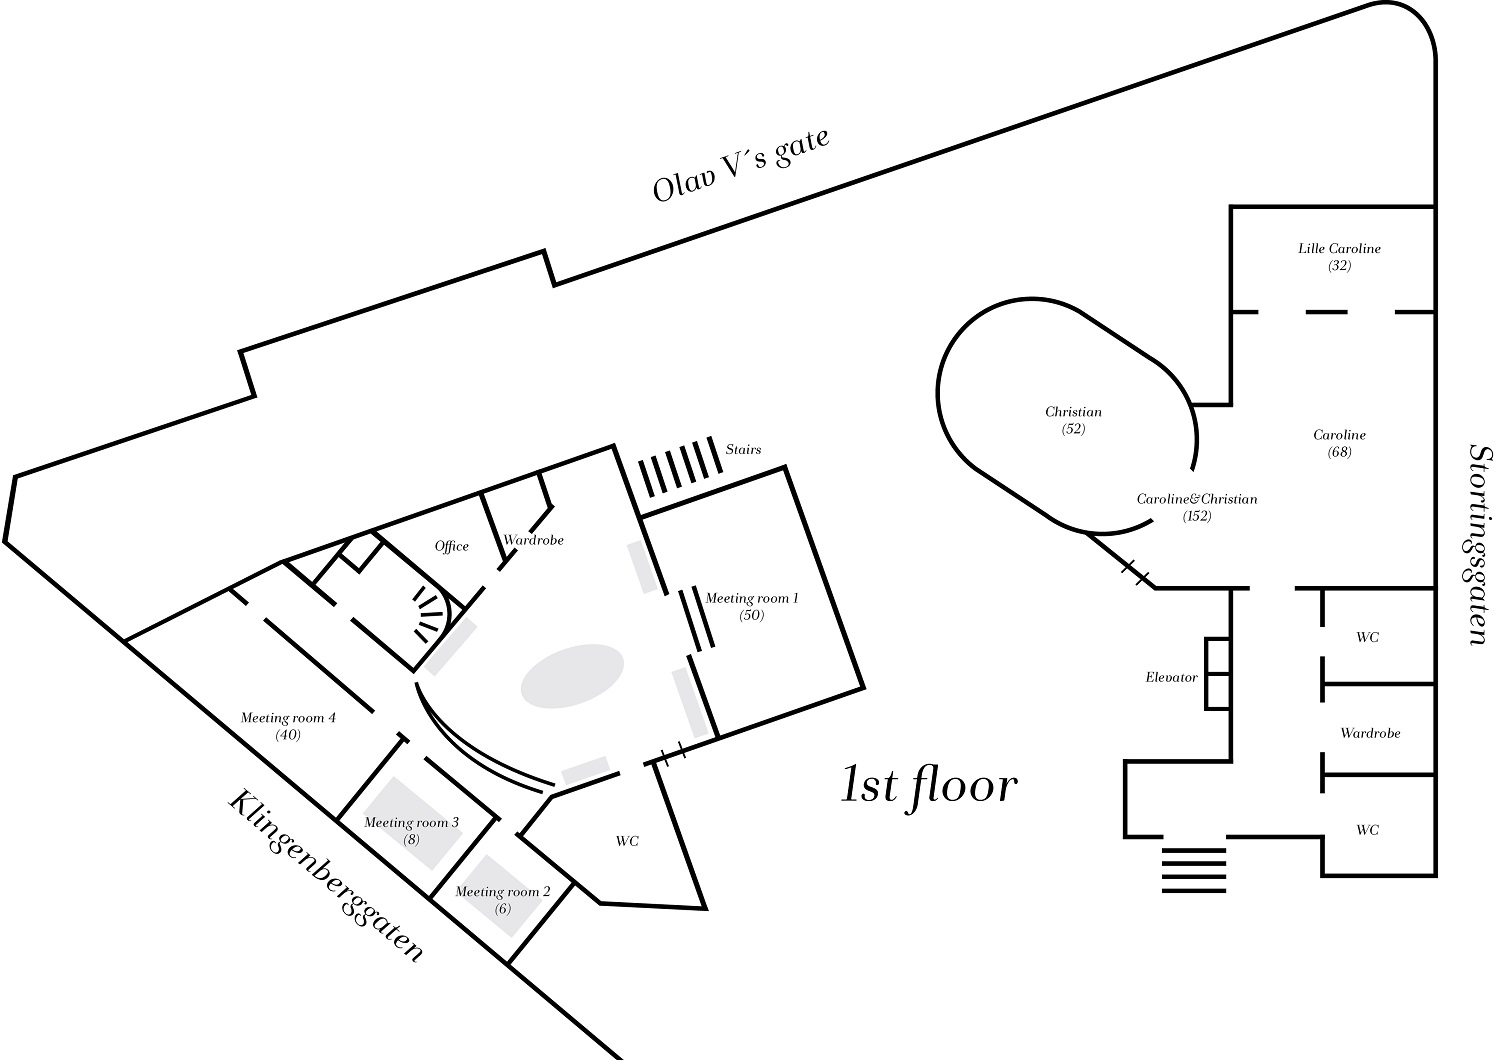 Floor plan of meetings and event fasilities at Continental